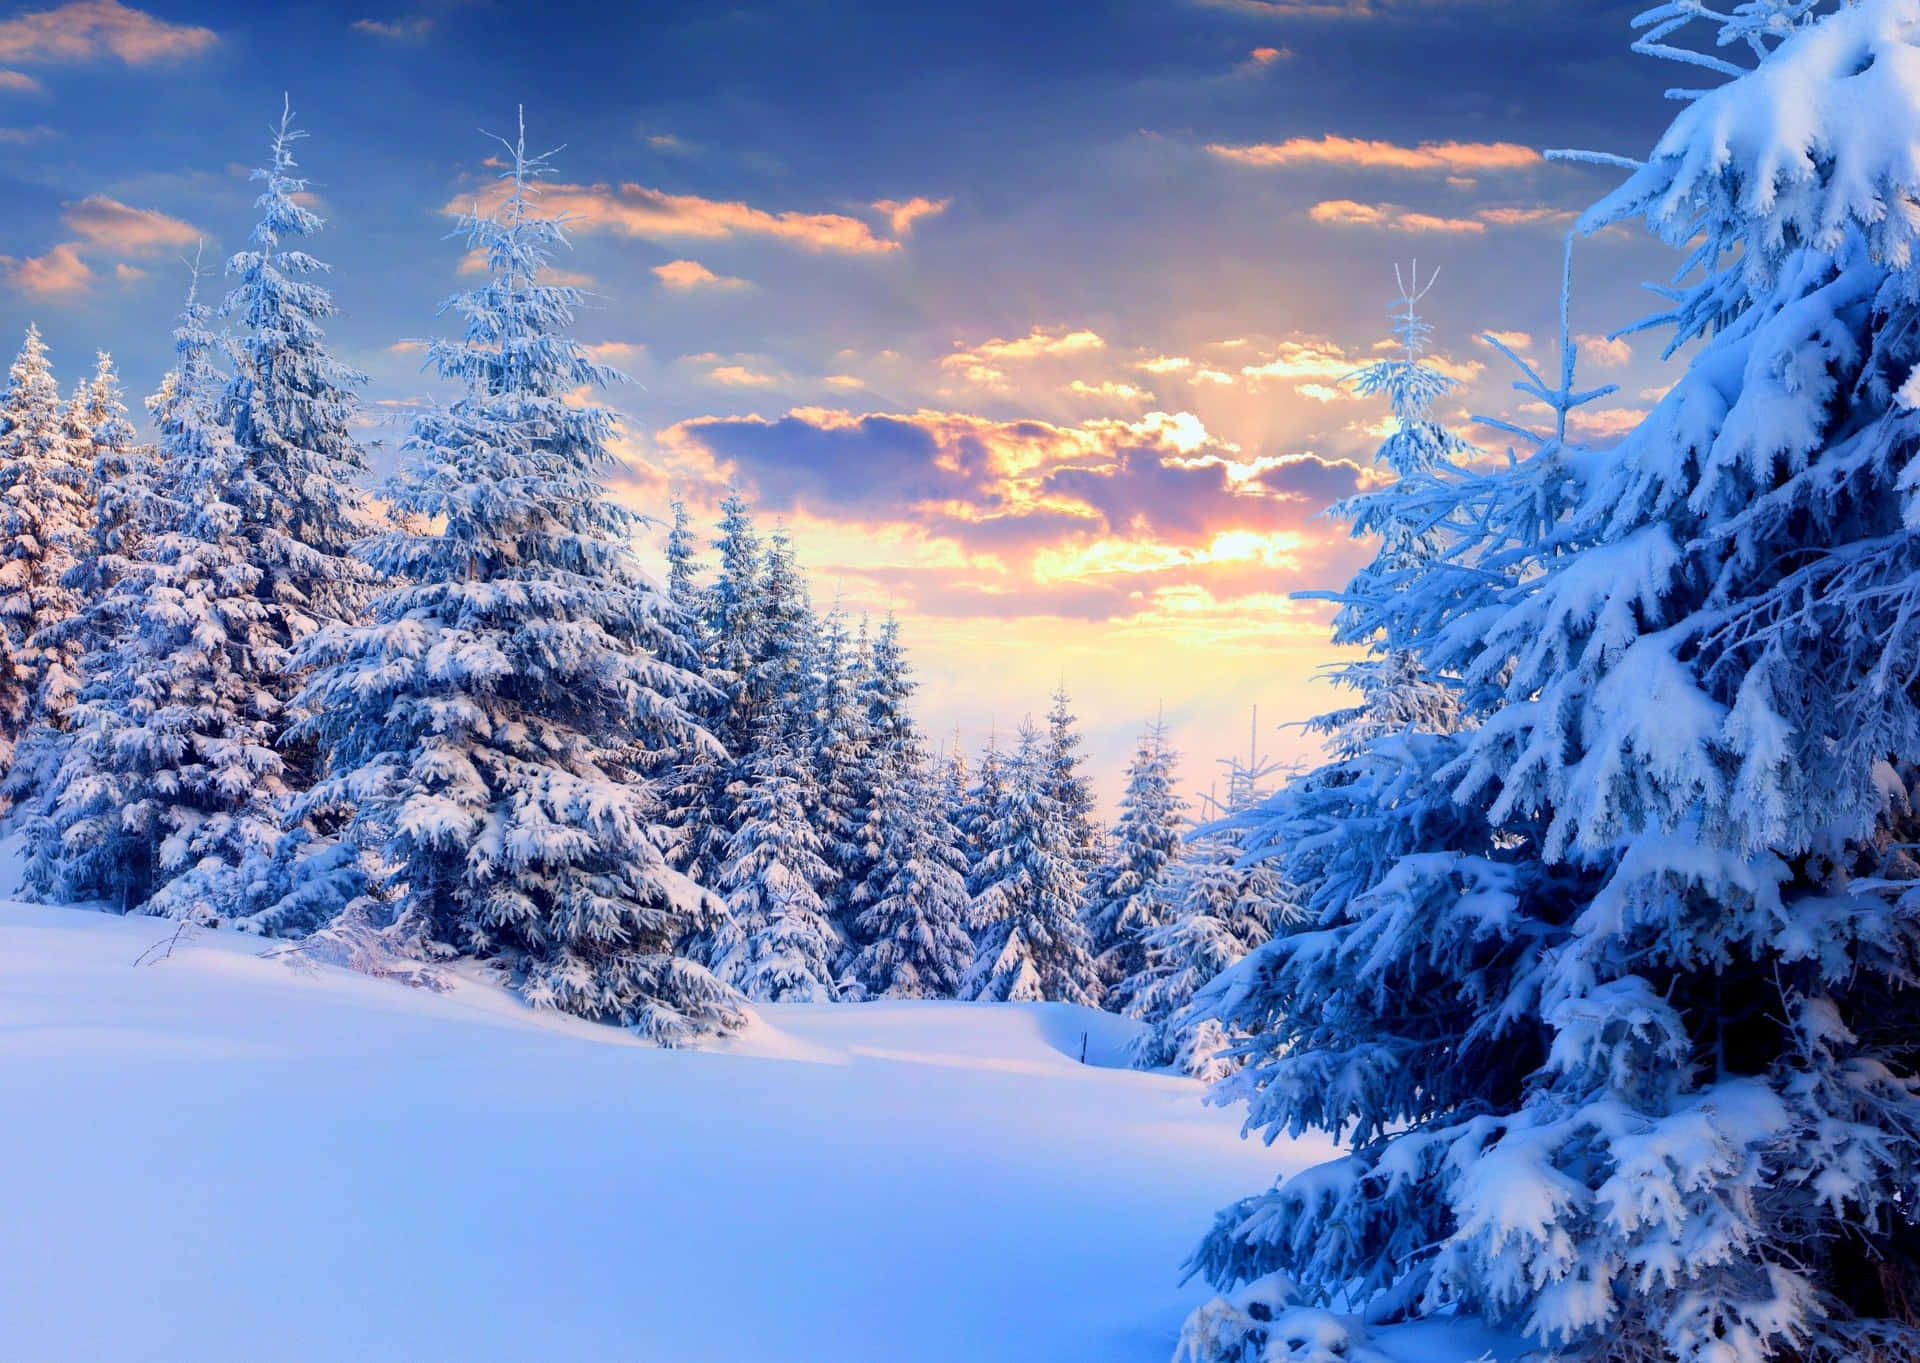 Enjoy the beauty of winter in this breathtaking landscape.